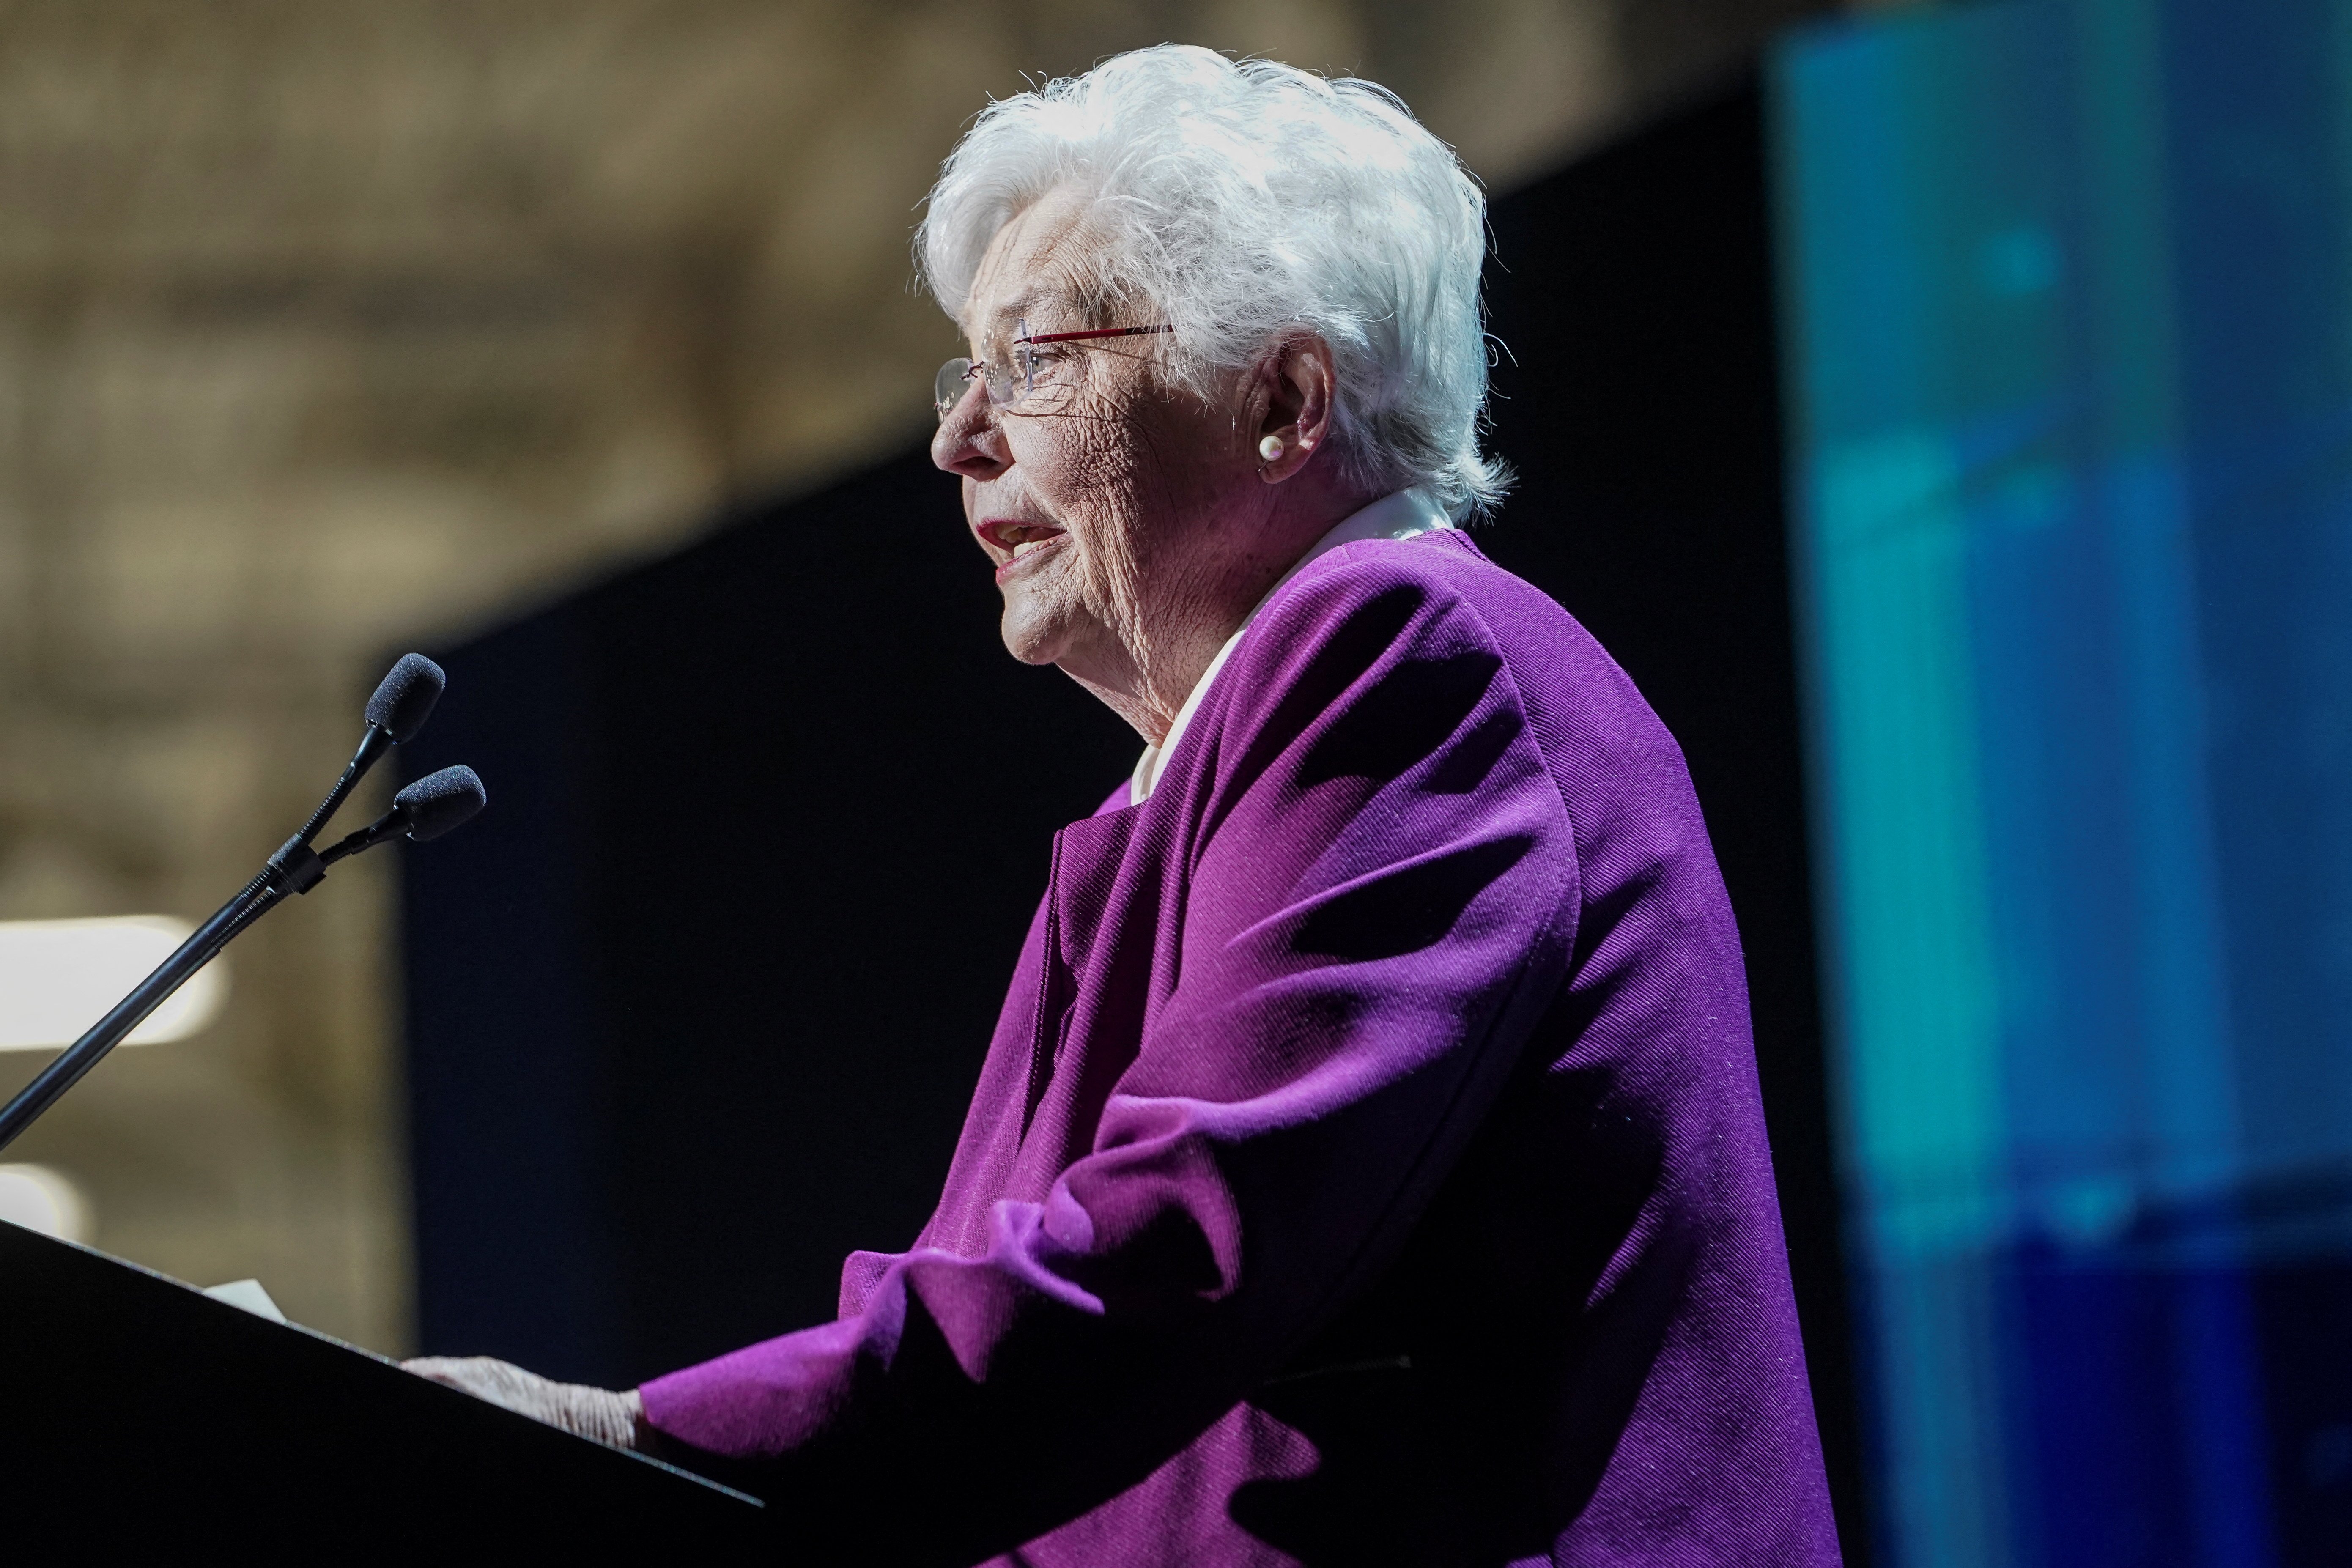 Alabama Governor Kay Ivey speaks at the opening of the Battery Factory for the Mercedes-Benz plant in Alabama